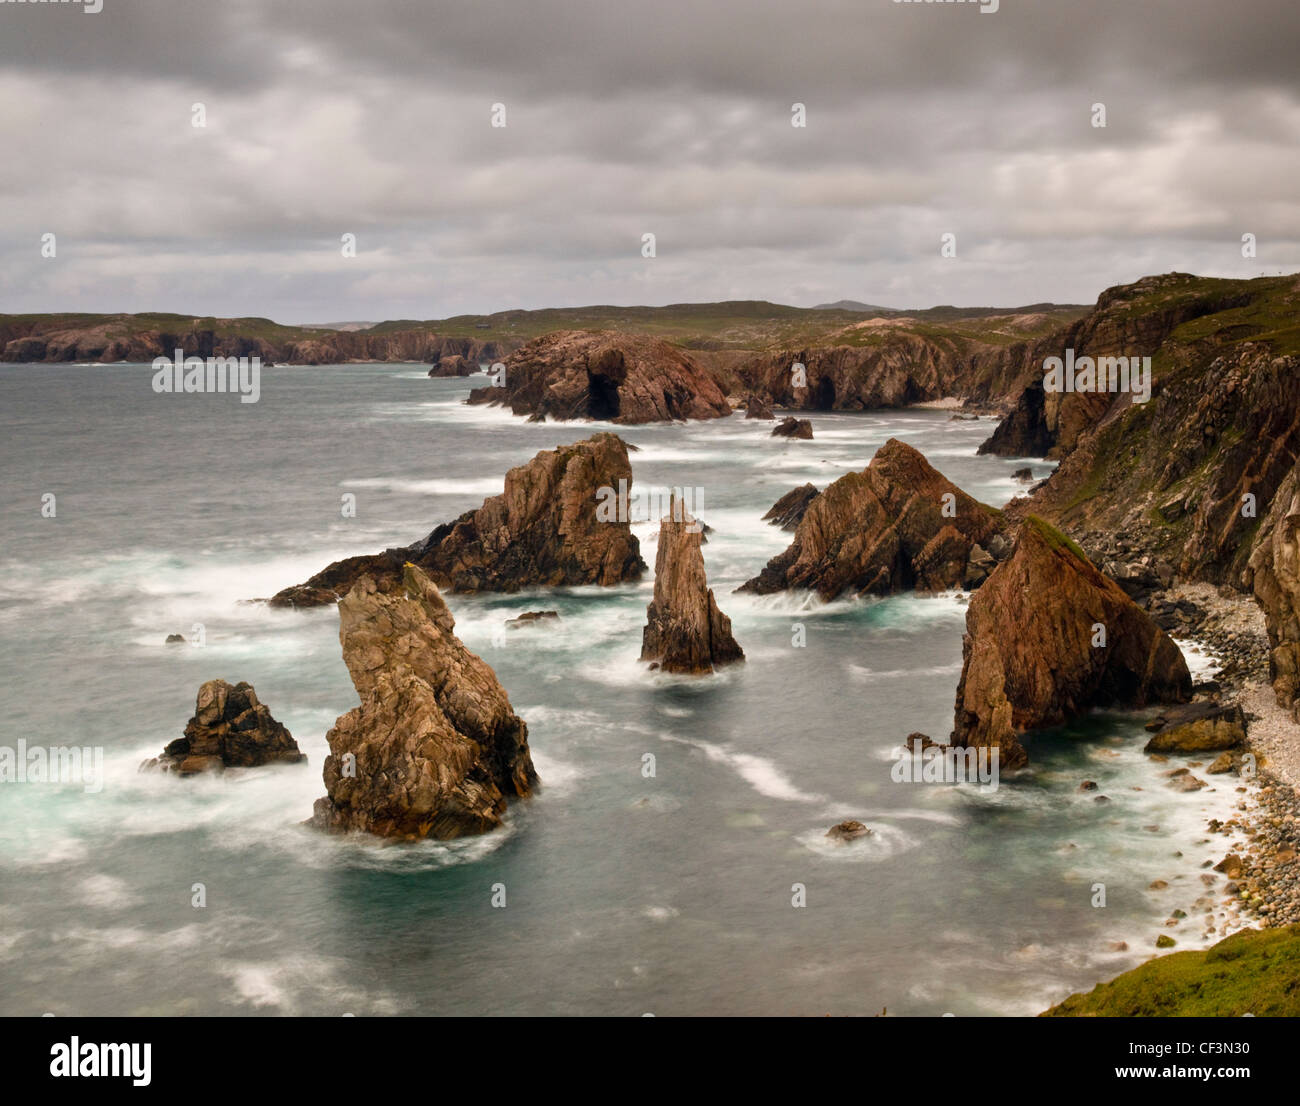 Sea stacks off the western coast of the Isle of Lewis in Scotland. Stock Photo